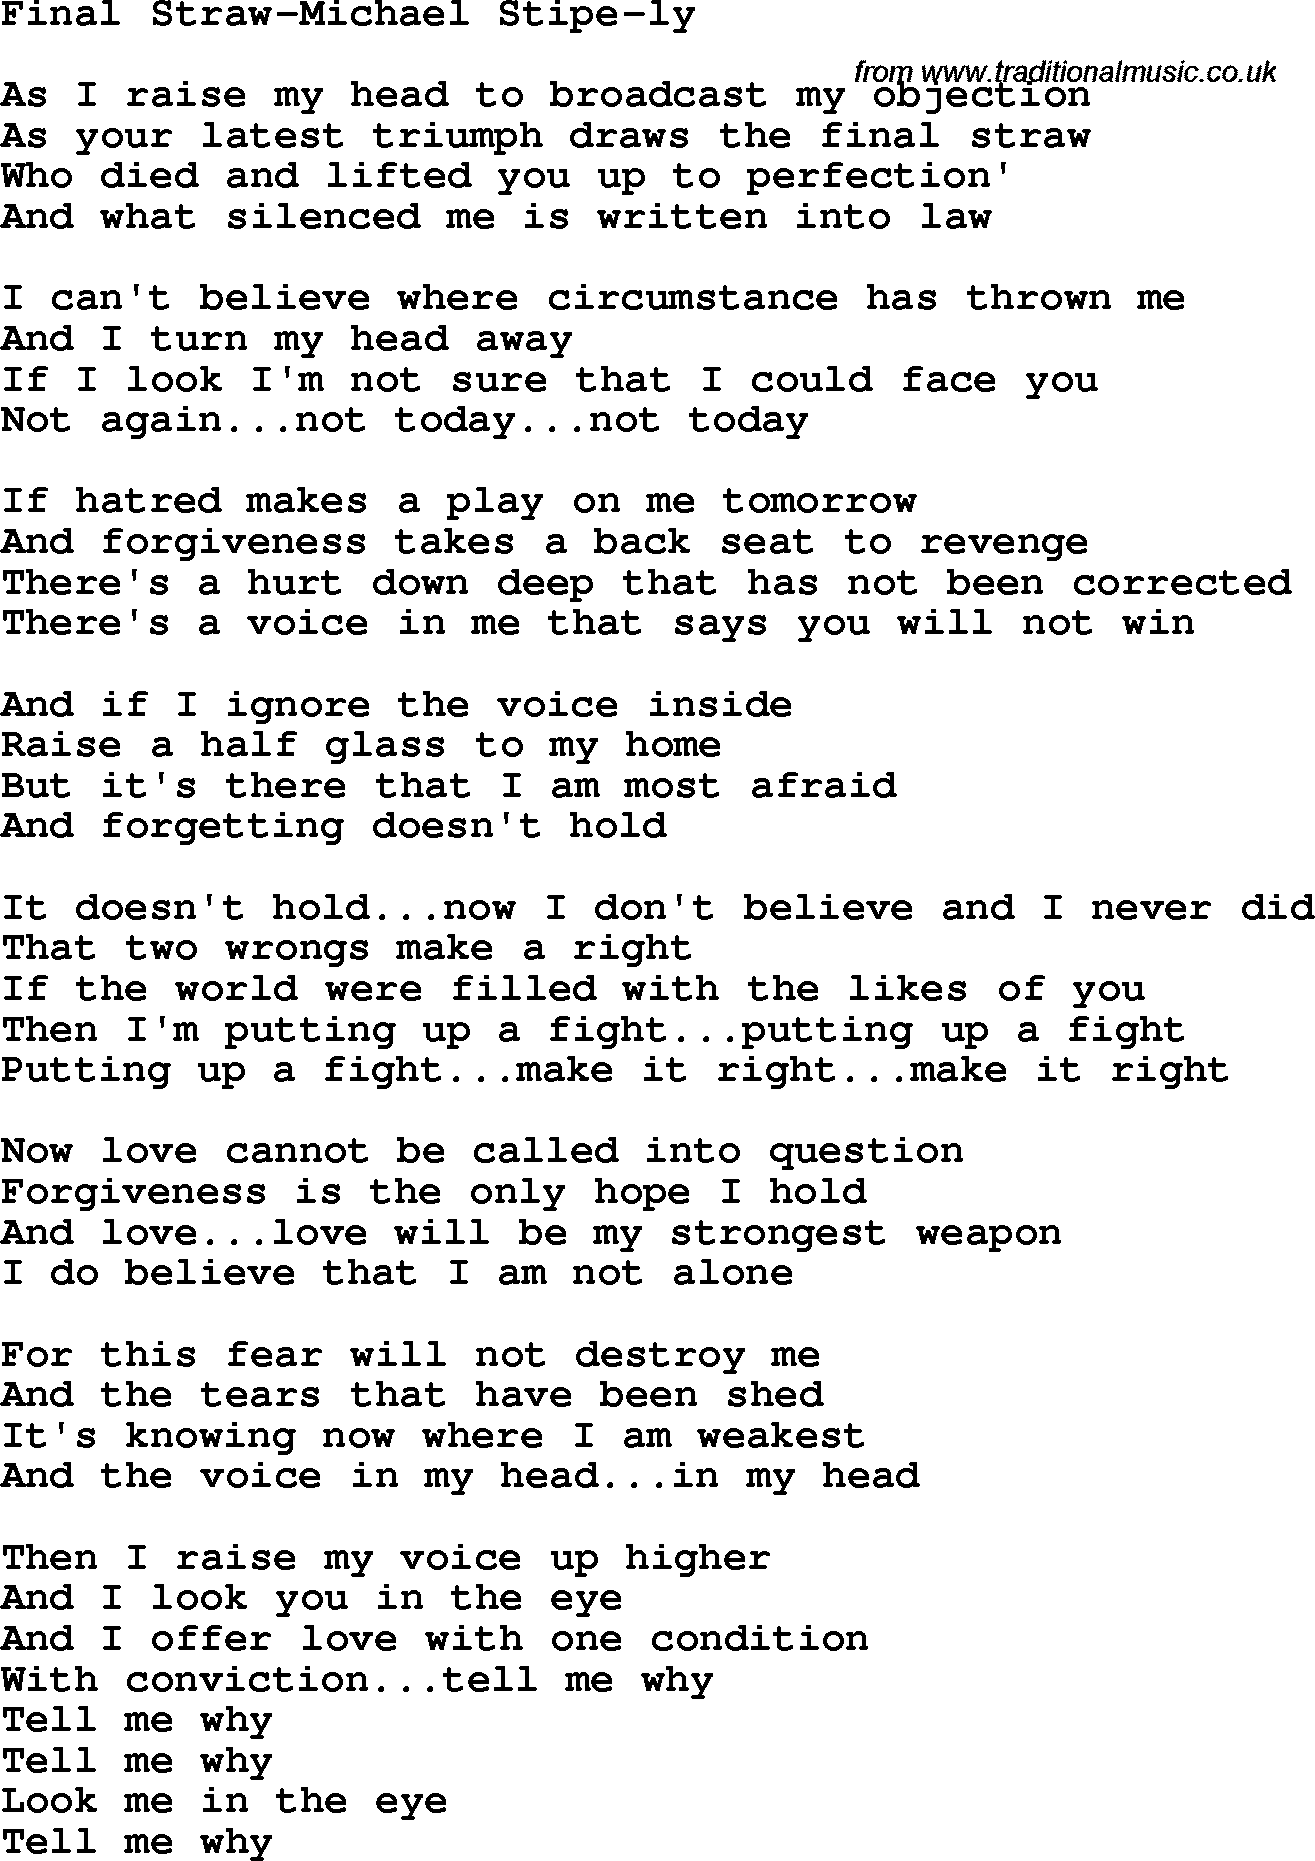 Protest Song Final Straw-Michael Stipe-Ly lyrics and chords